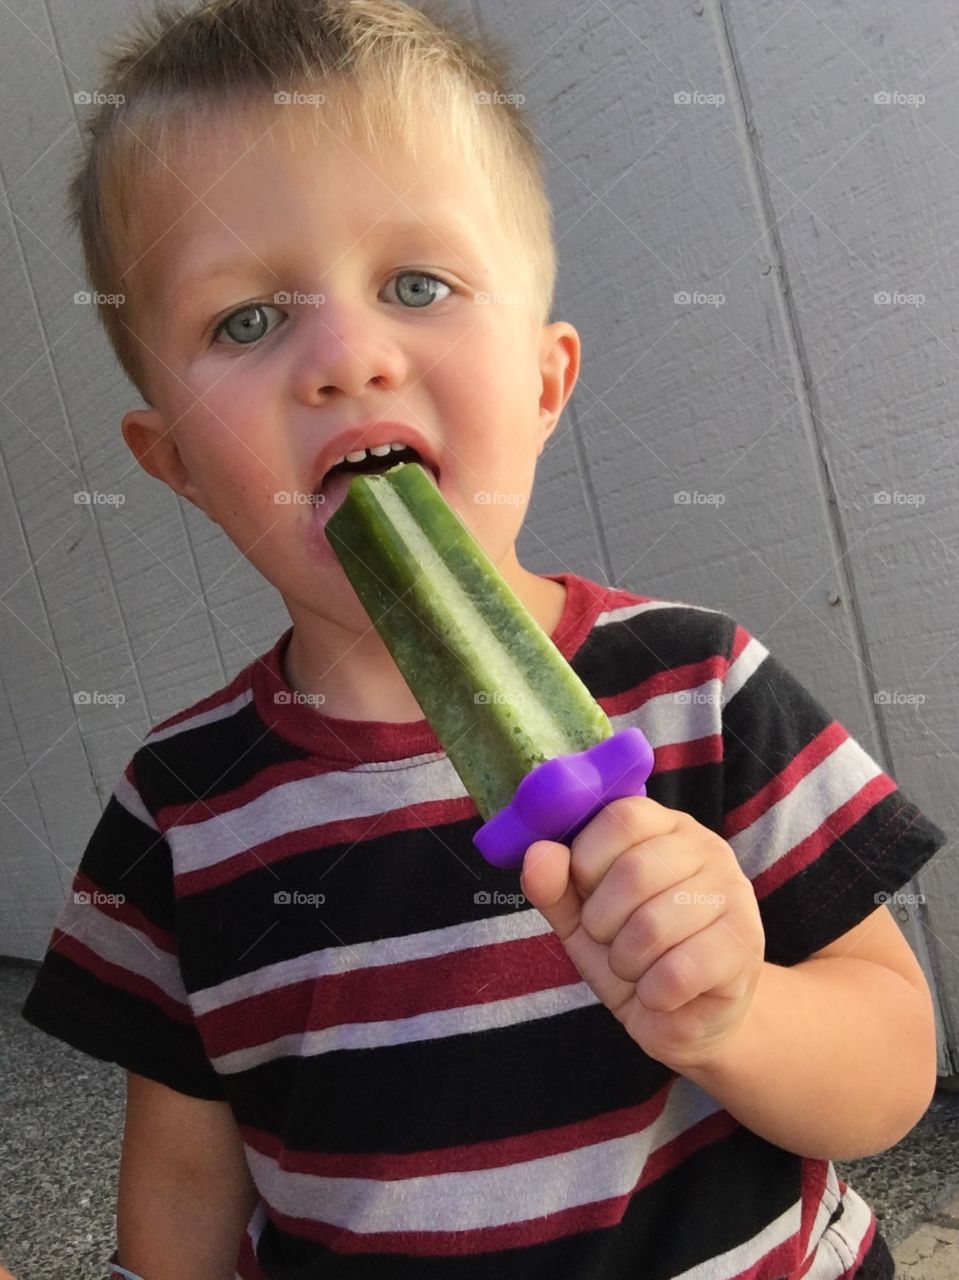 Boy eating a popsicle.